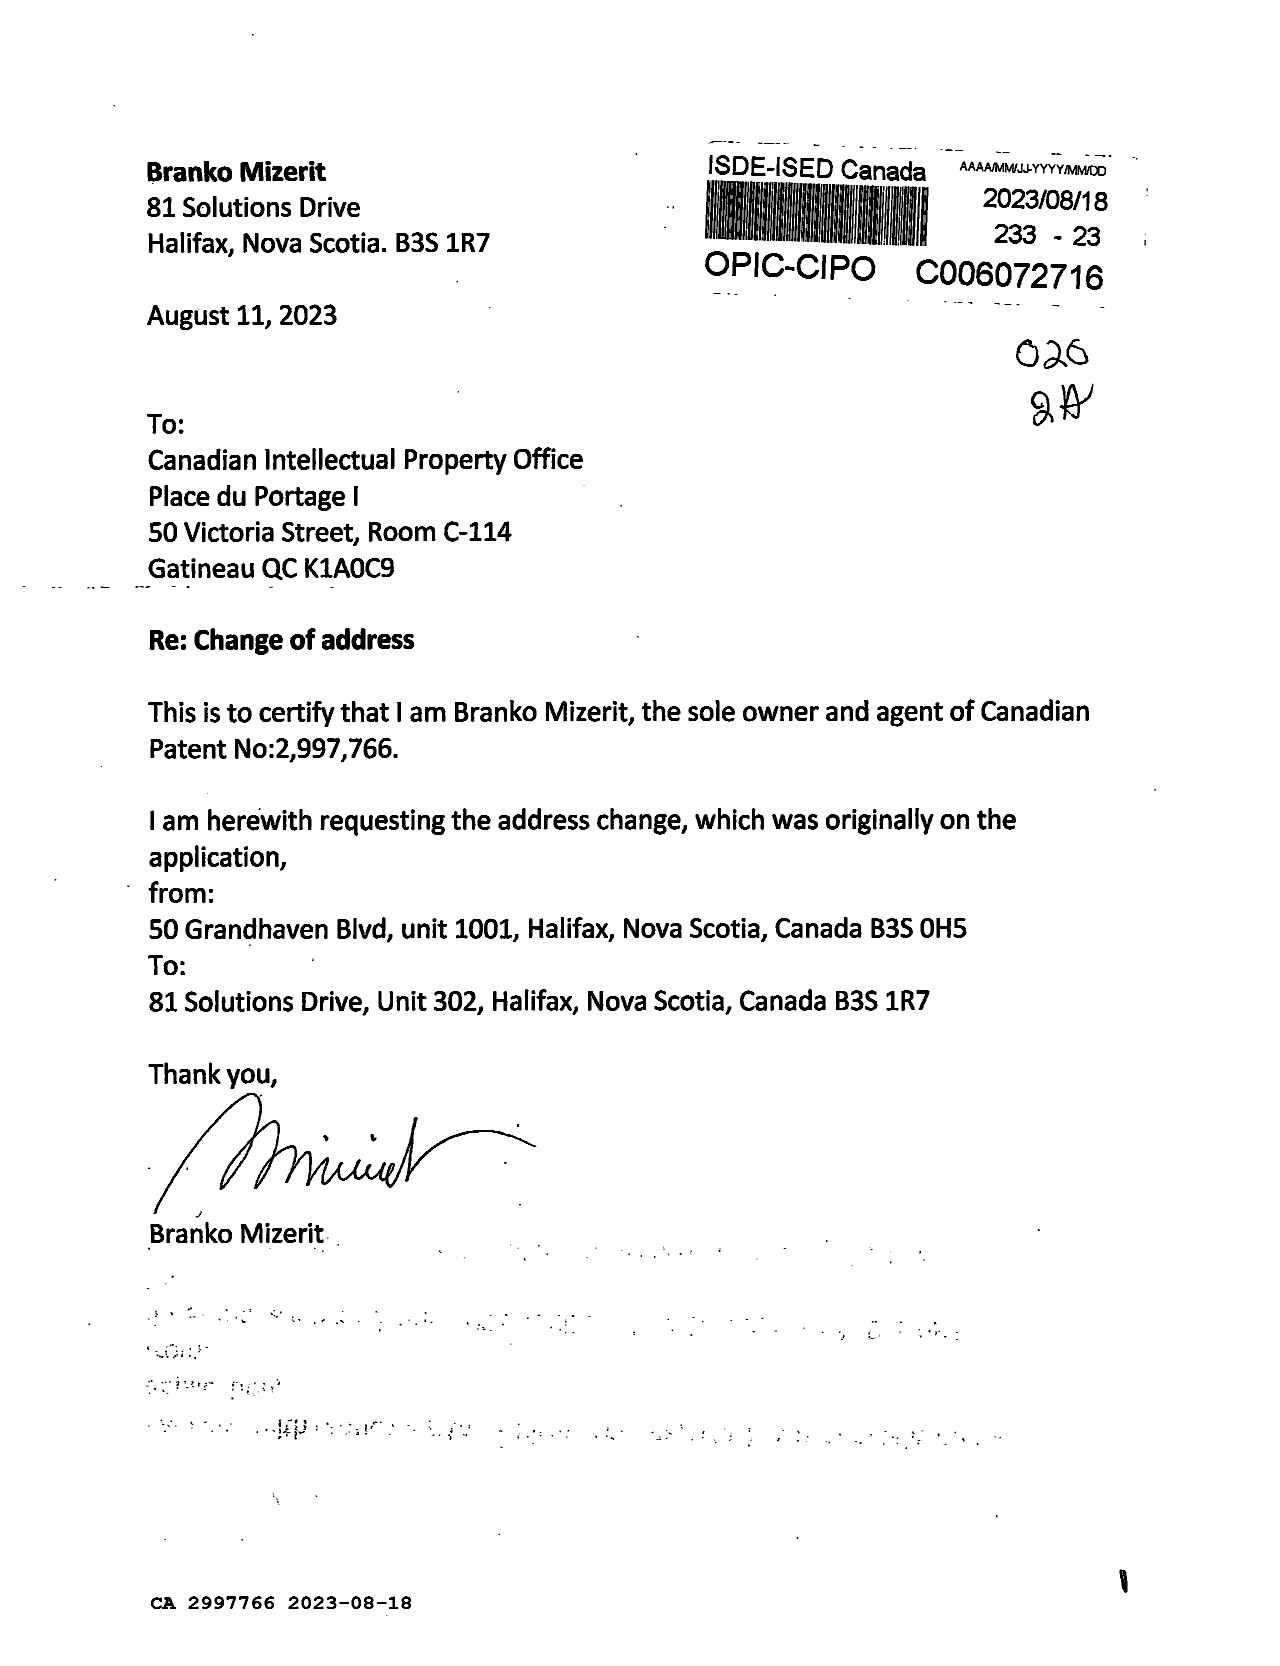 Canadian Patent Document 2997766. Correspondence Related to Formalities 20230818. Image 1 of 1